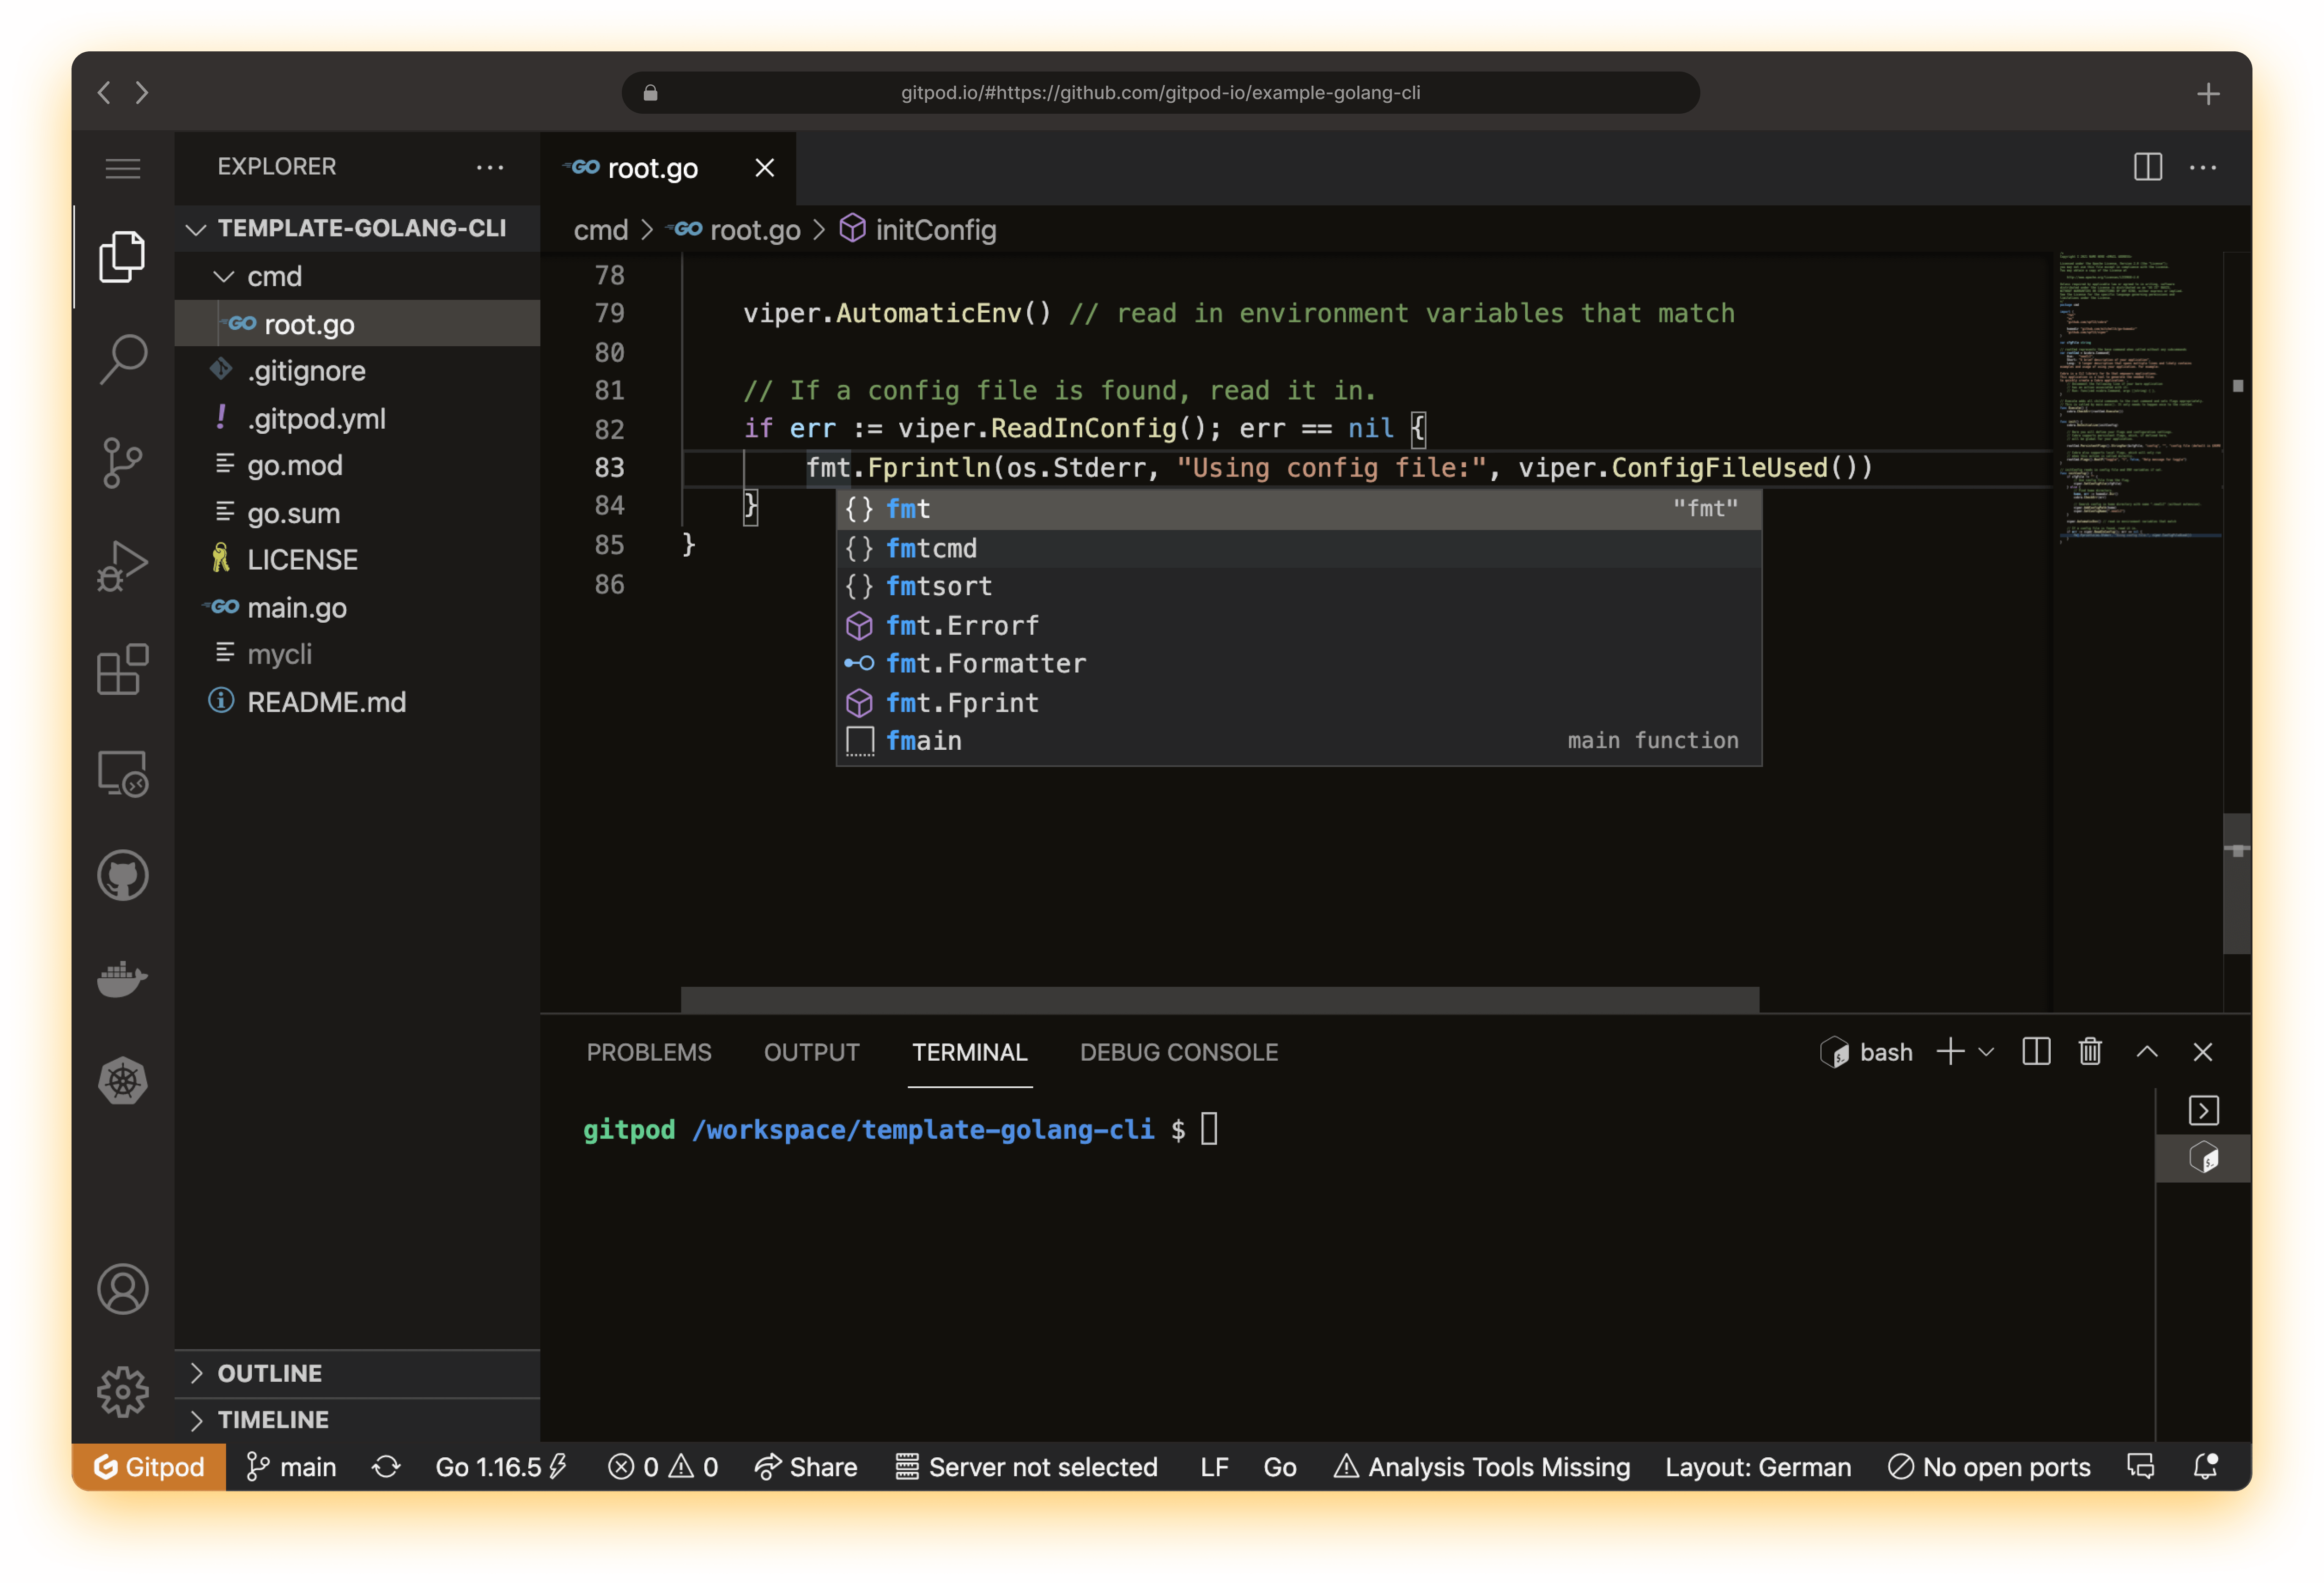 VS Code running in the browser